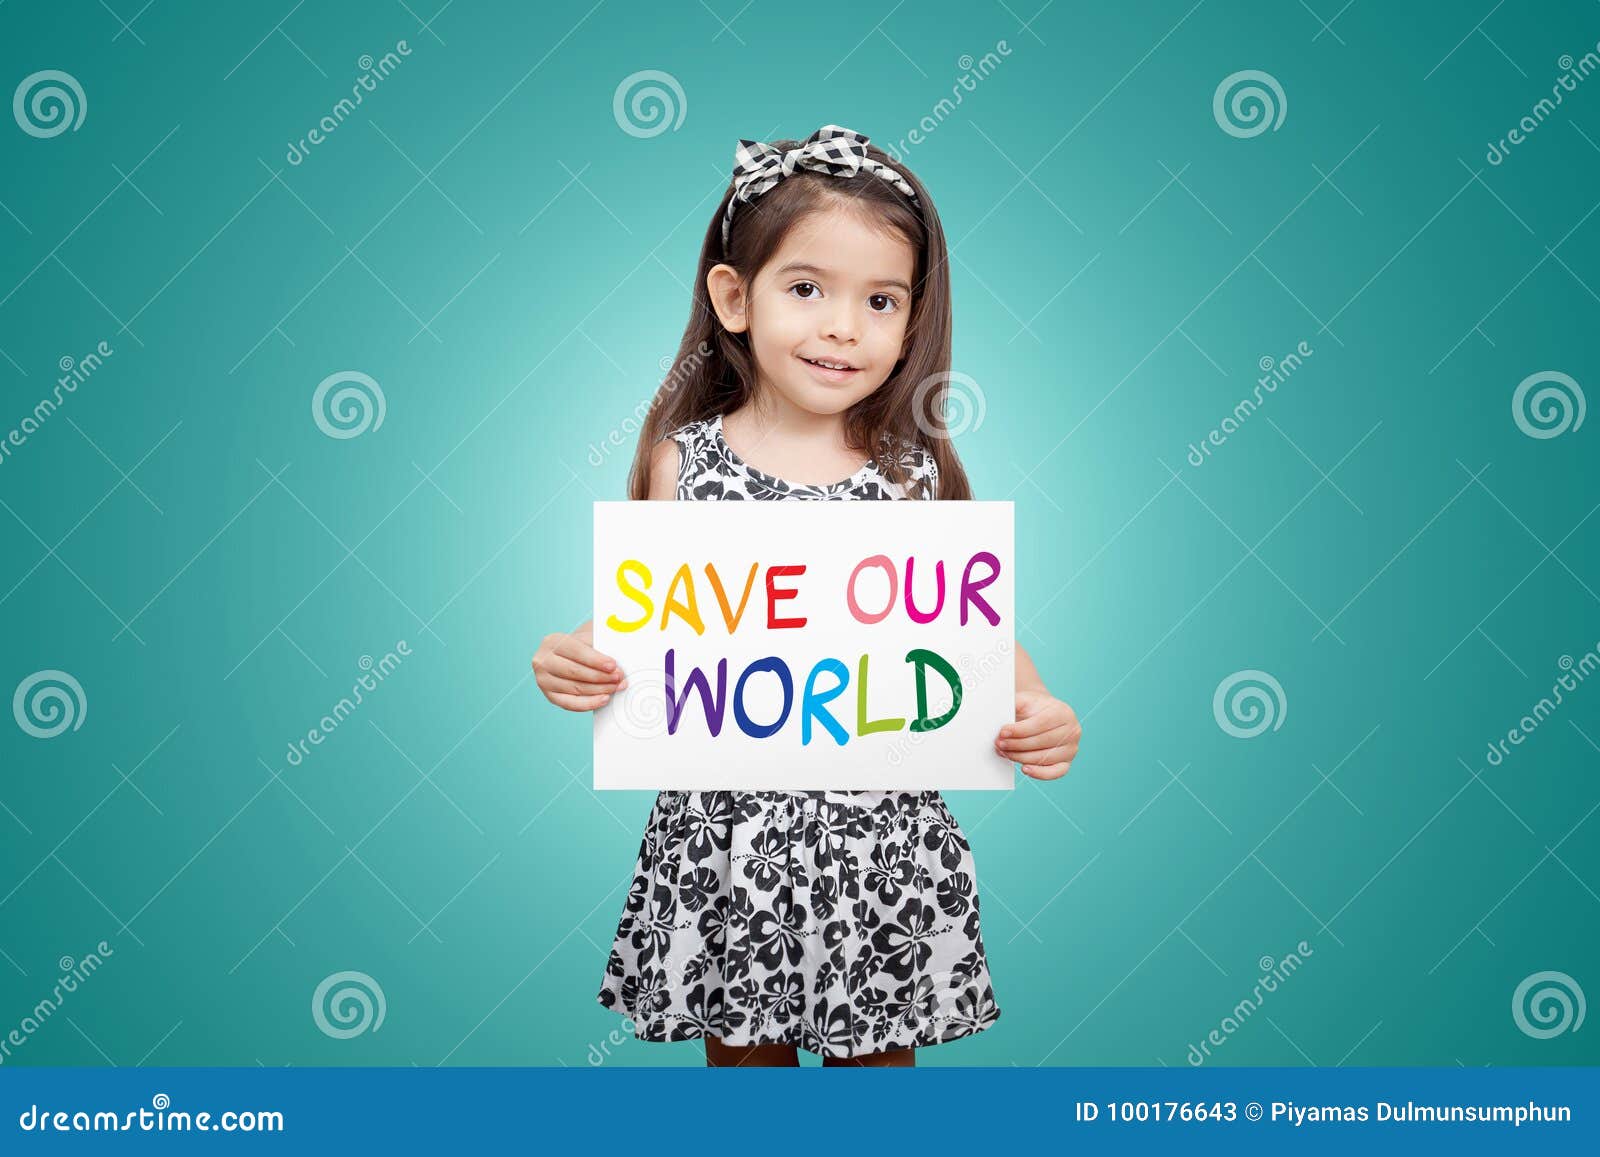 save world save life save the planet, the ecosystem, green life